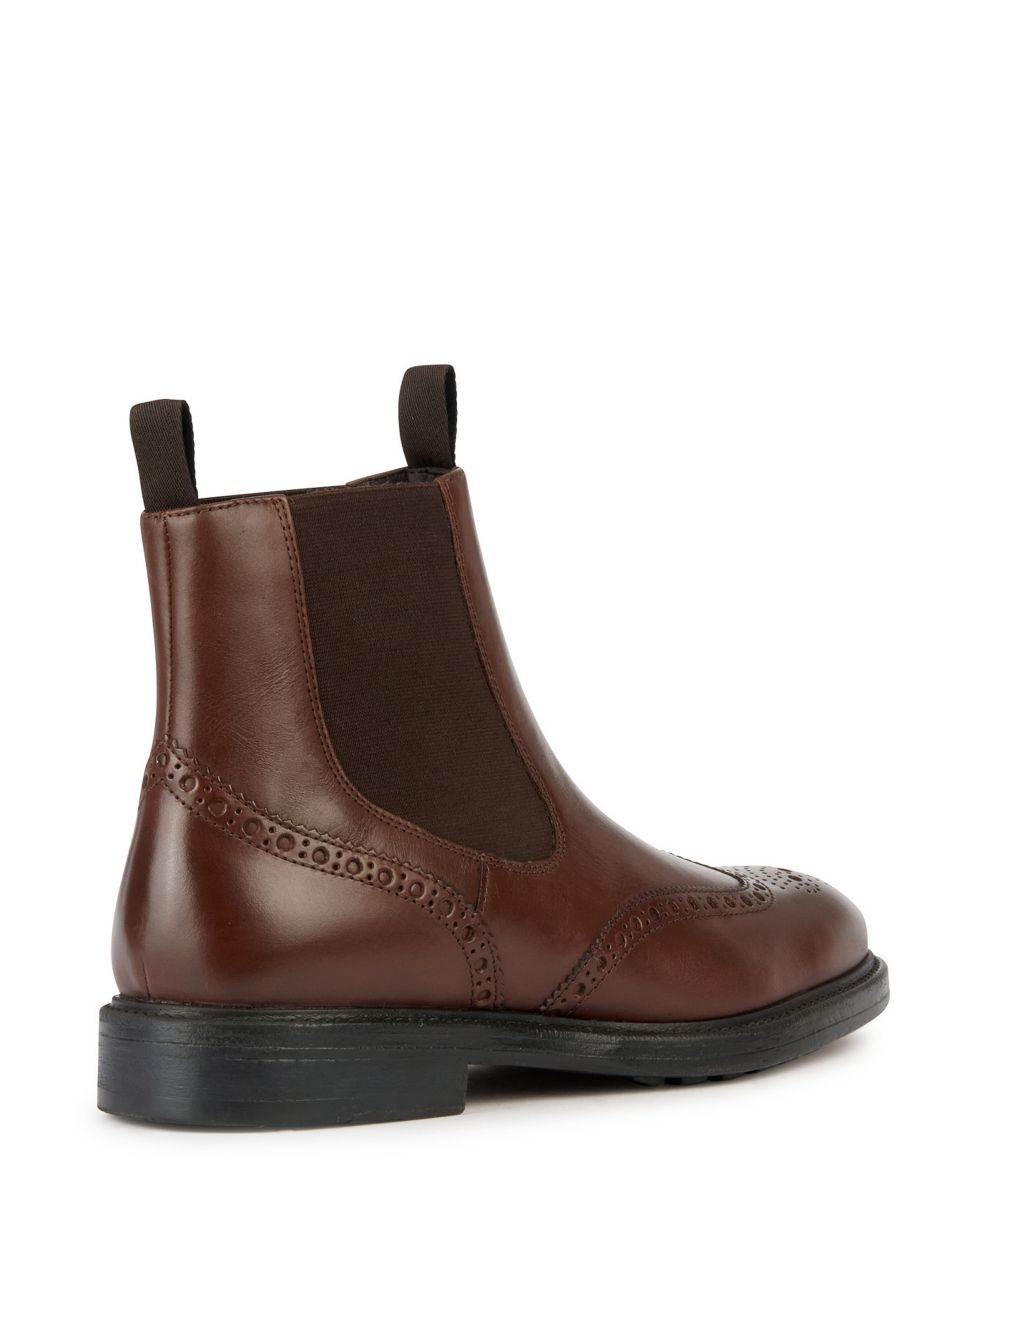 Wide Fit Leather Pull-On Chelsea Boots image 4